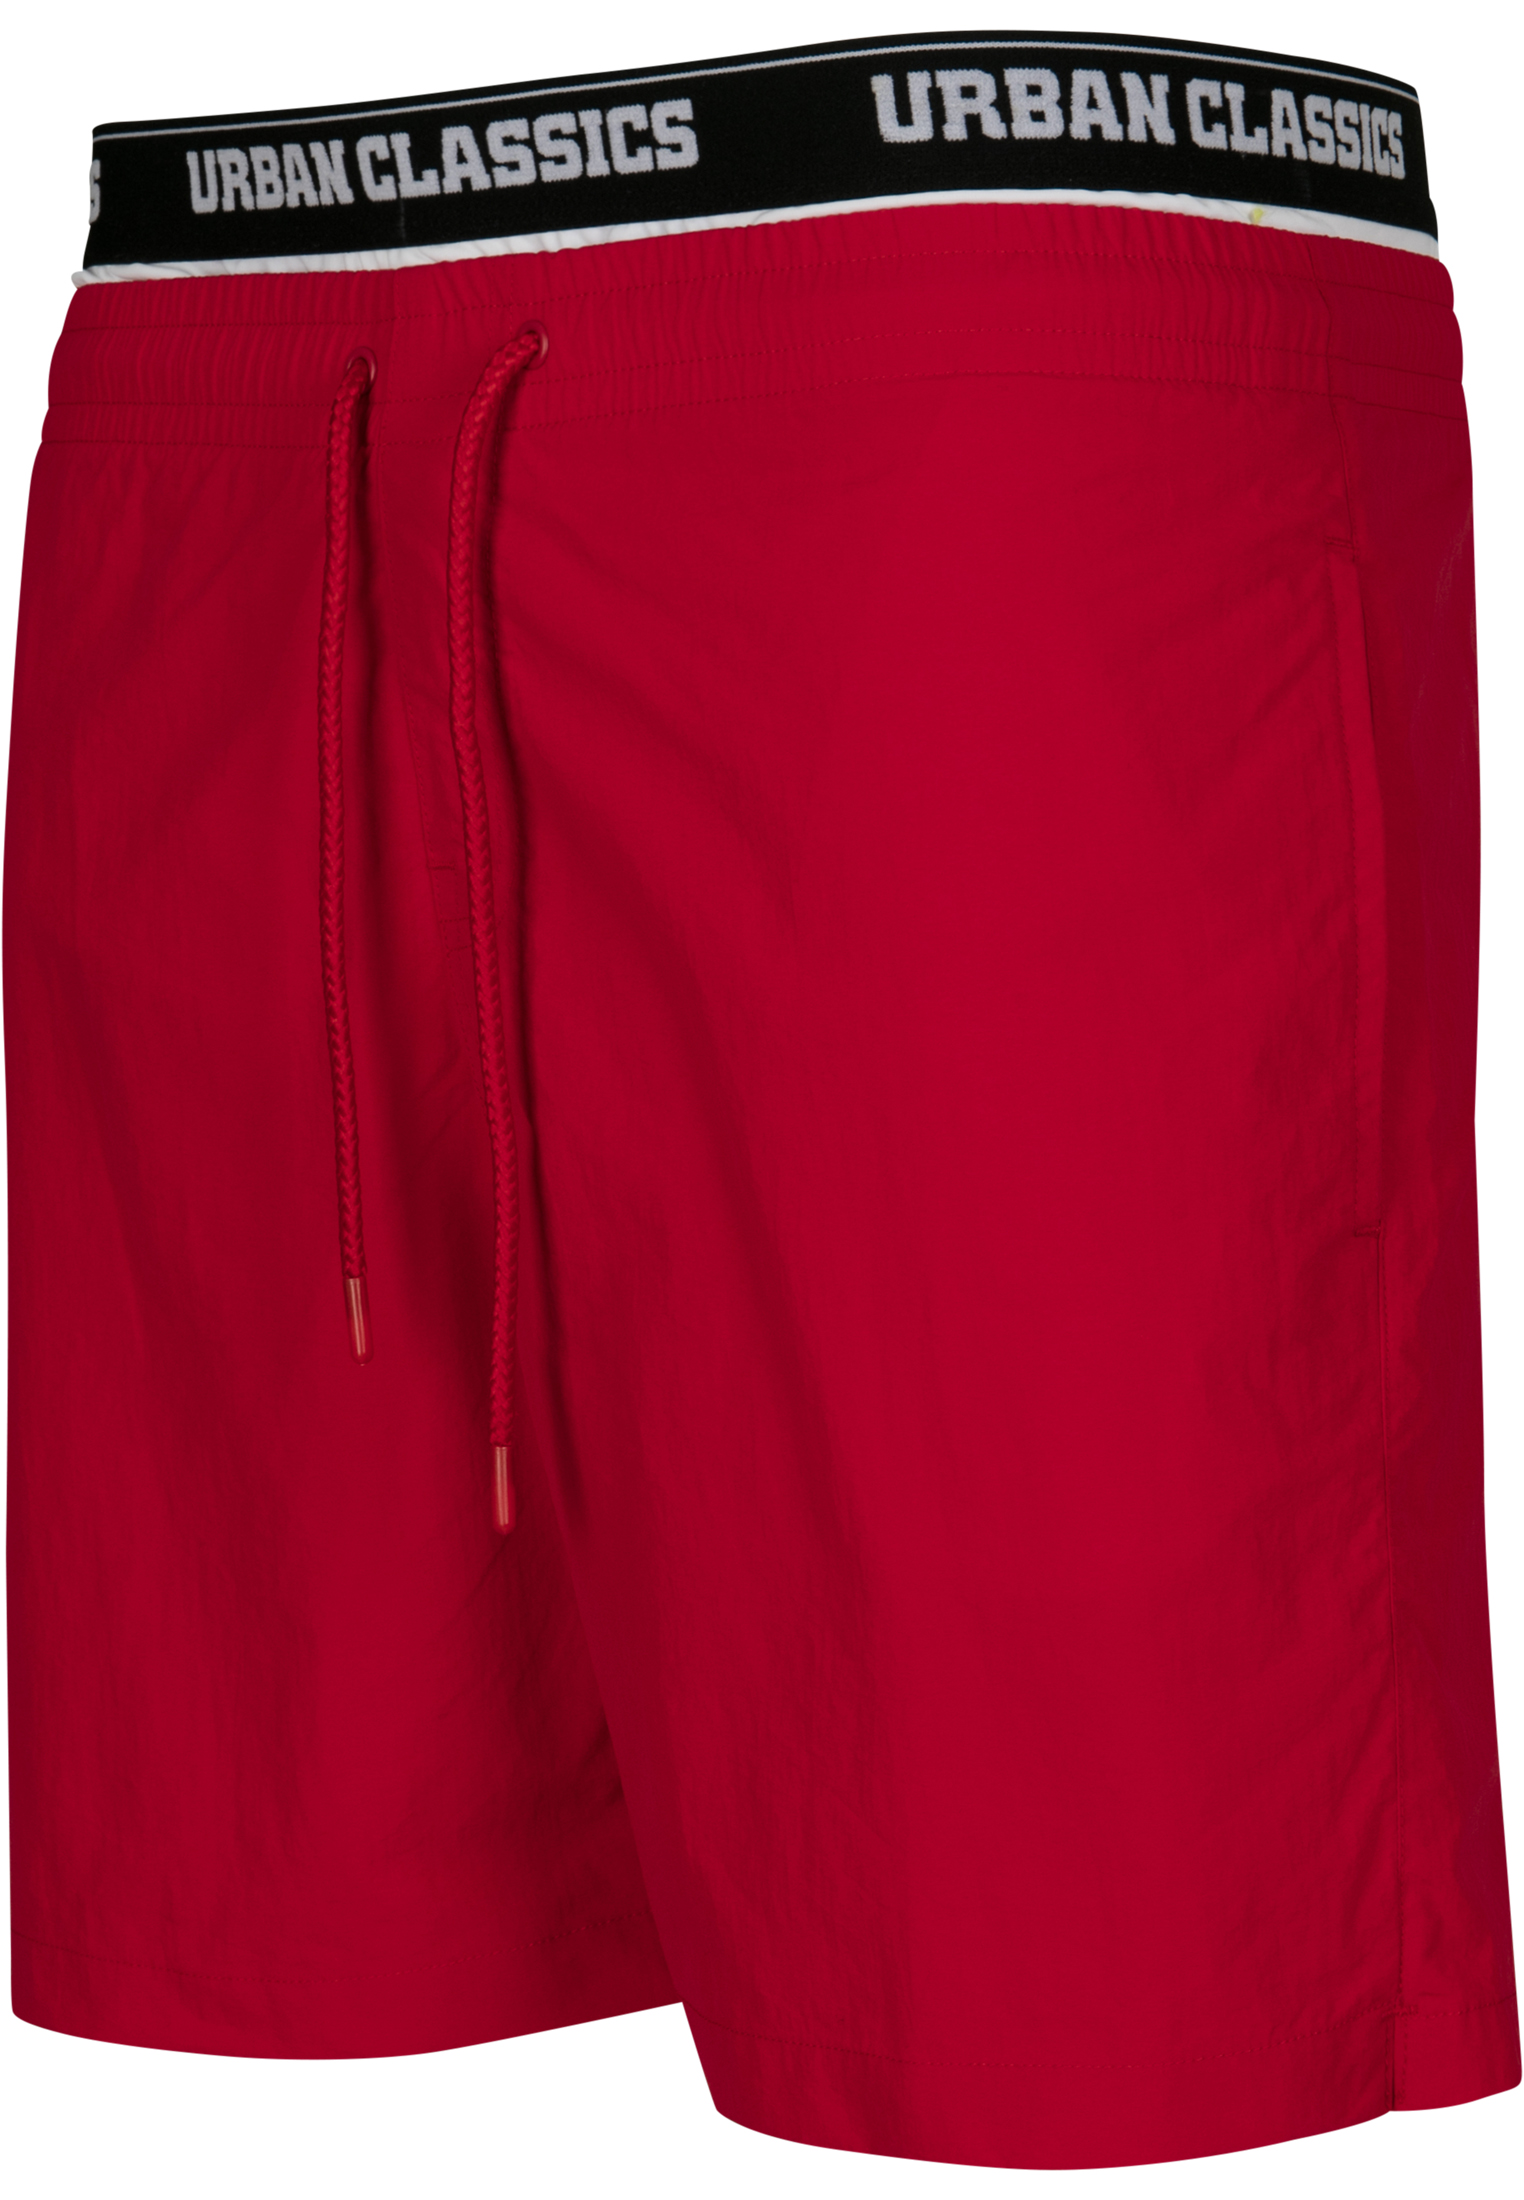 Bademode Two in One Swim Shorts in Farbe firered/wht/blk